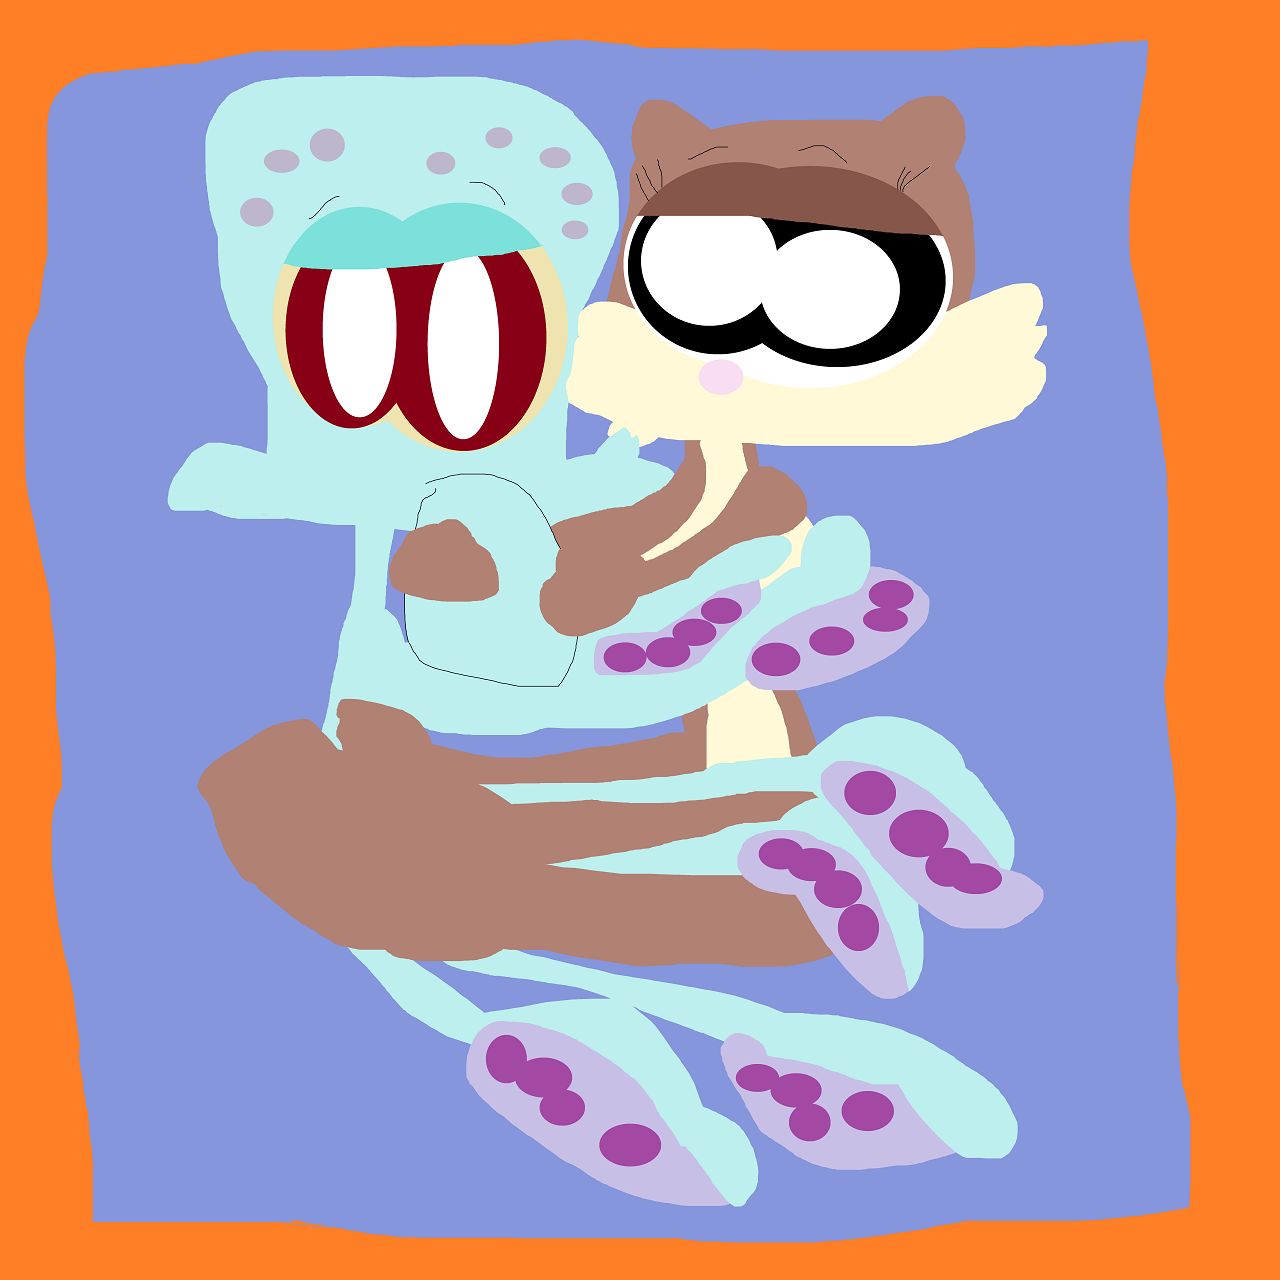 Just A Random Squidward And Sandy In Bed by Falconlobo